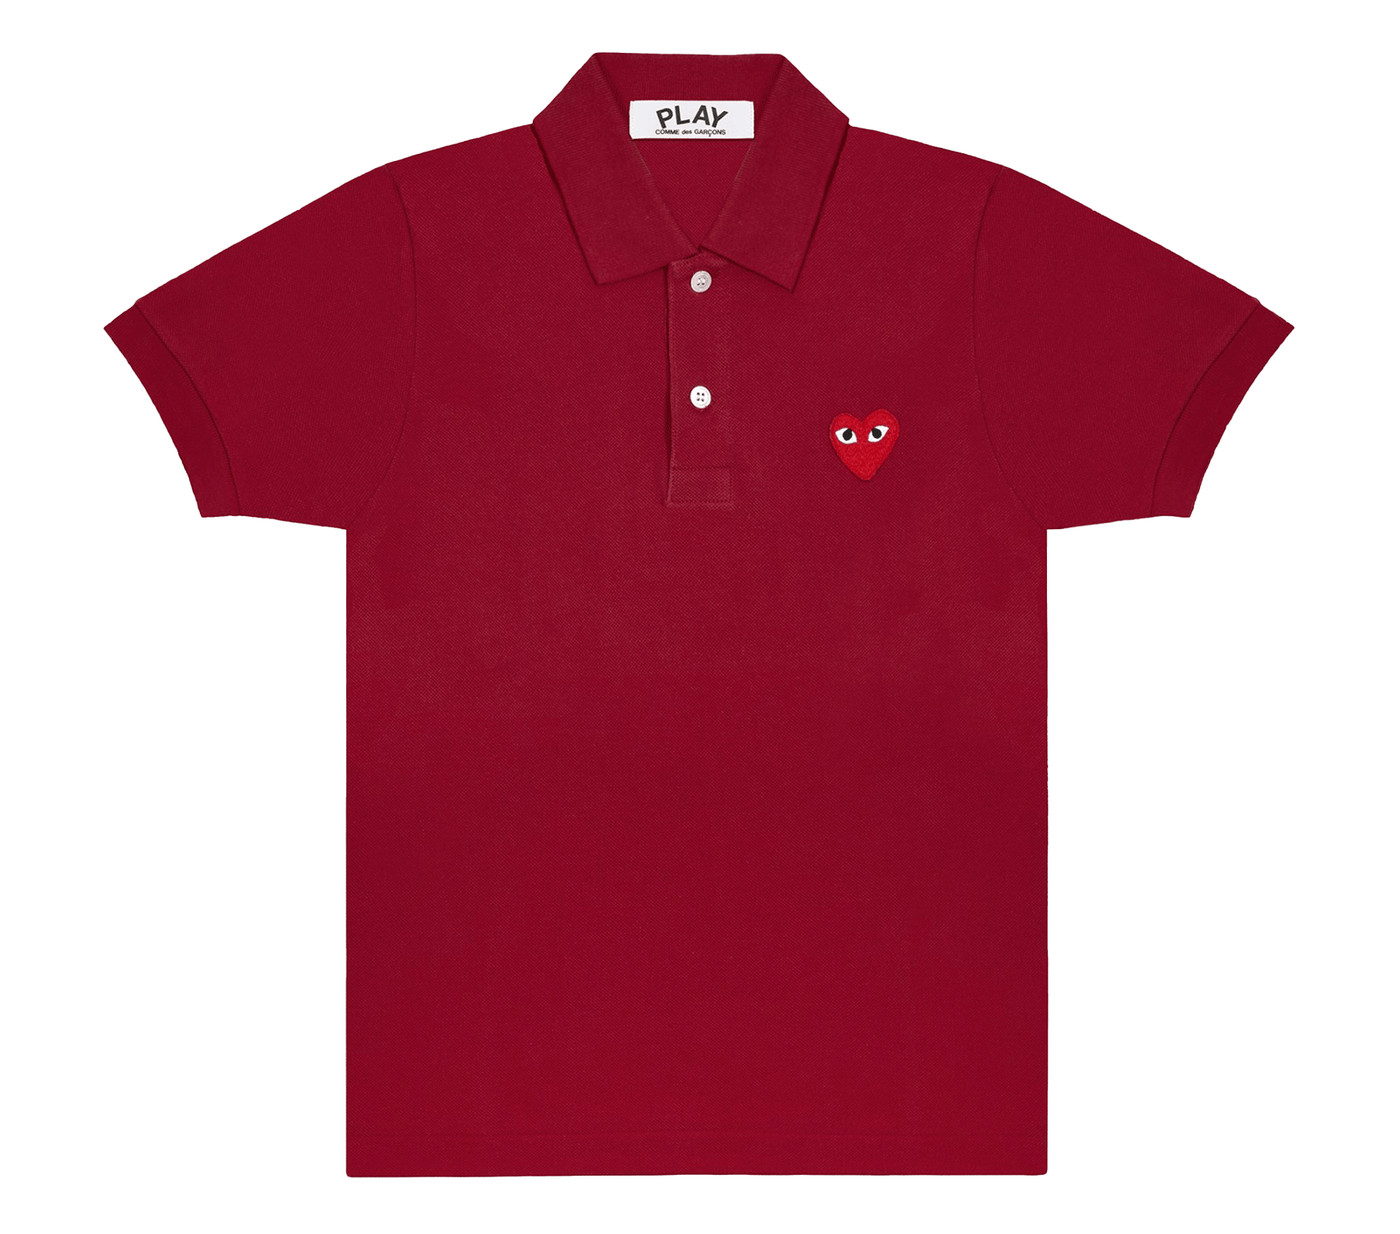    Comme-des-Garcons-Play-Polo-Shirt-with-Red-Emblem-Men-DarkRed-1